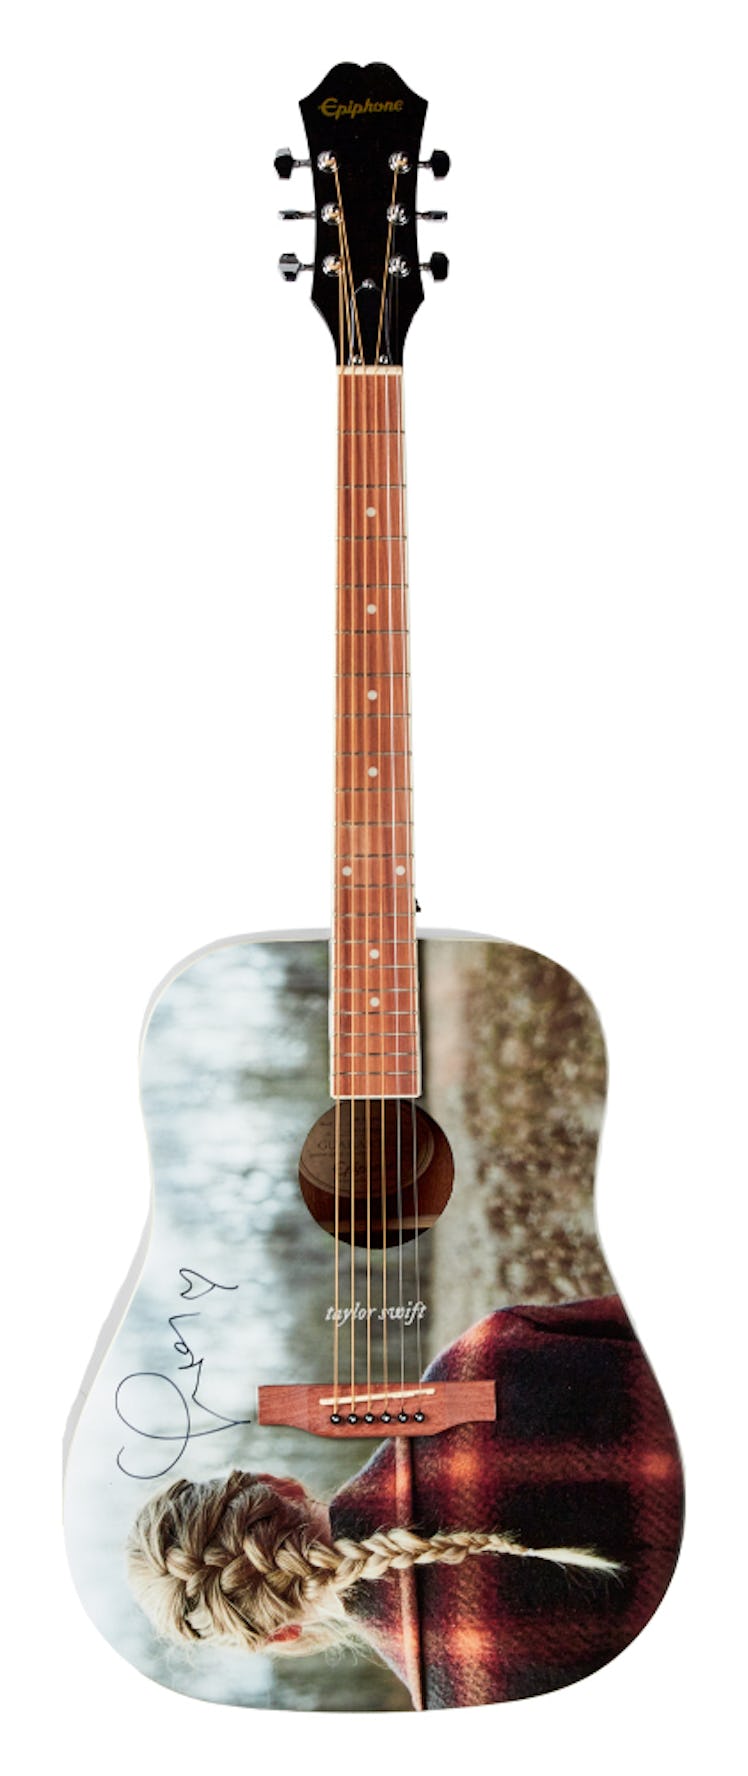 Taylor Swift's signed guitar is available at the 2023 Grammys auction. 